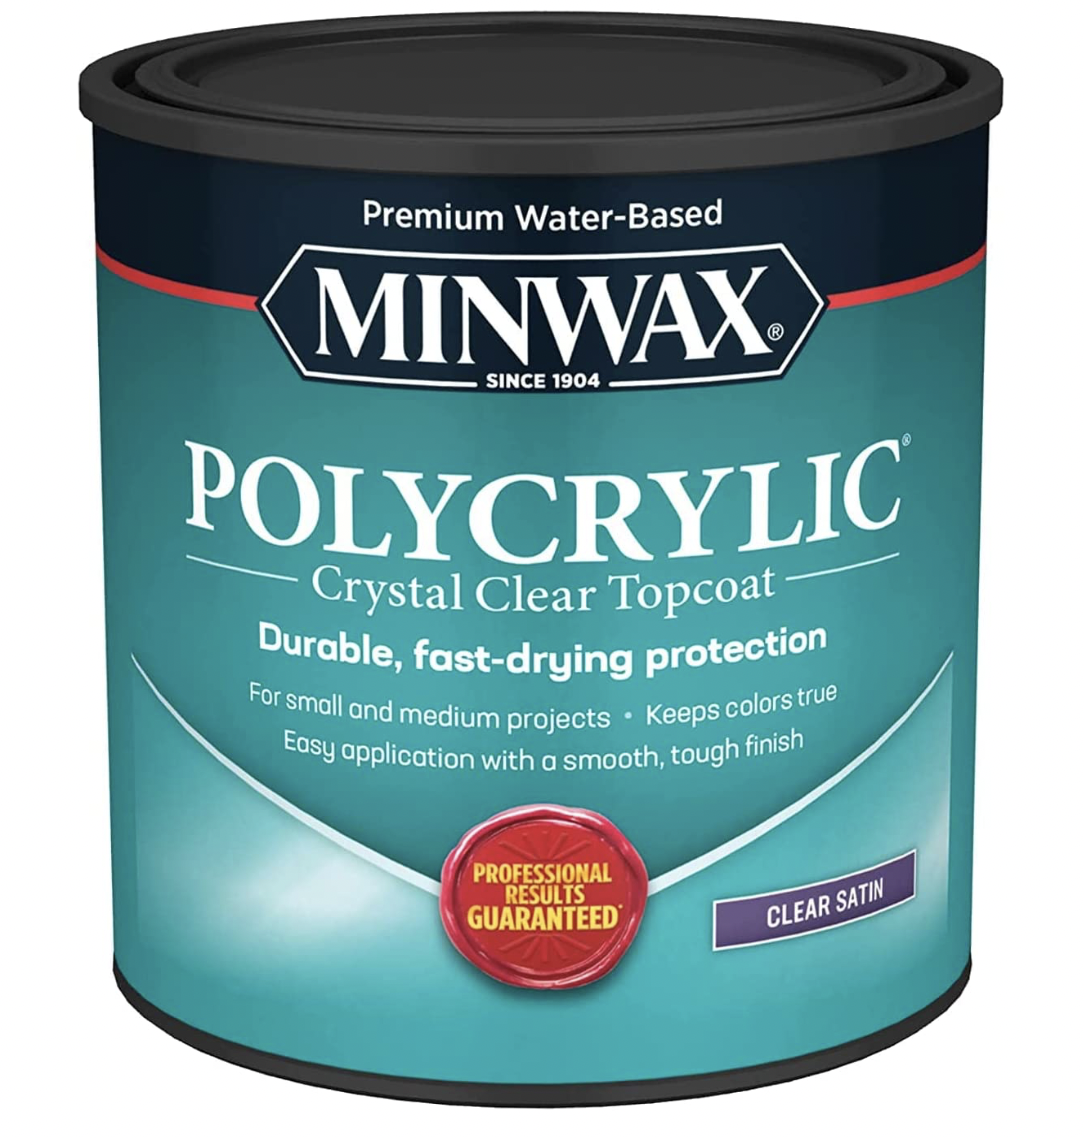 Polycrylic – When, why, and how to use it